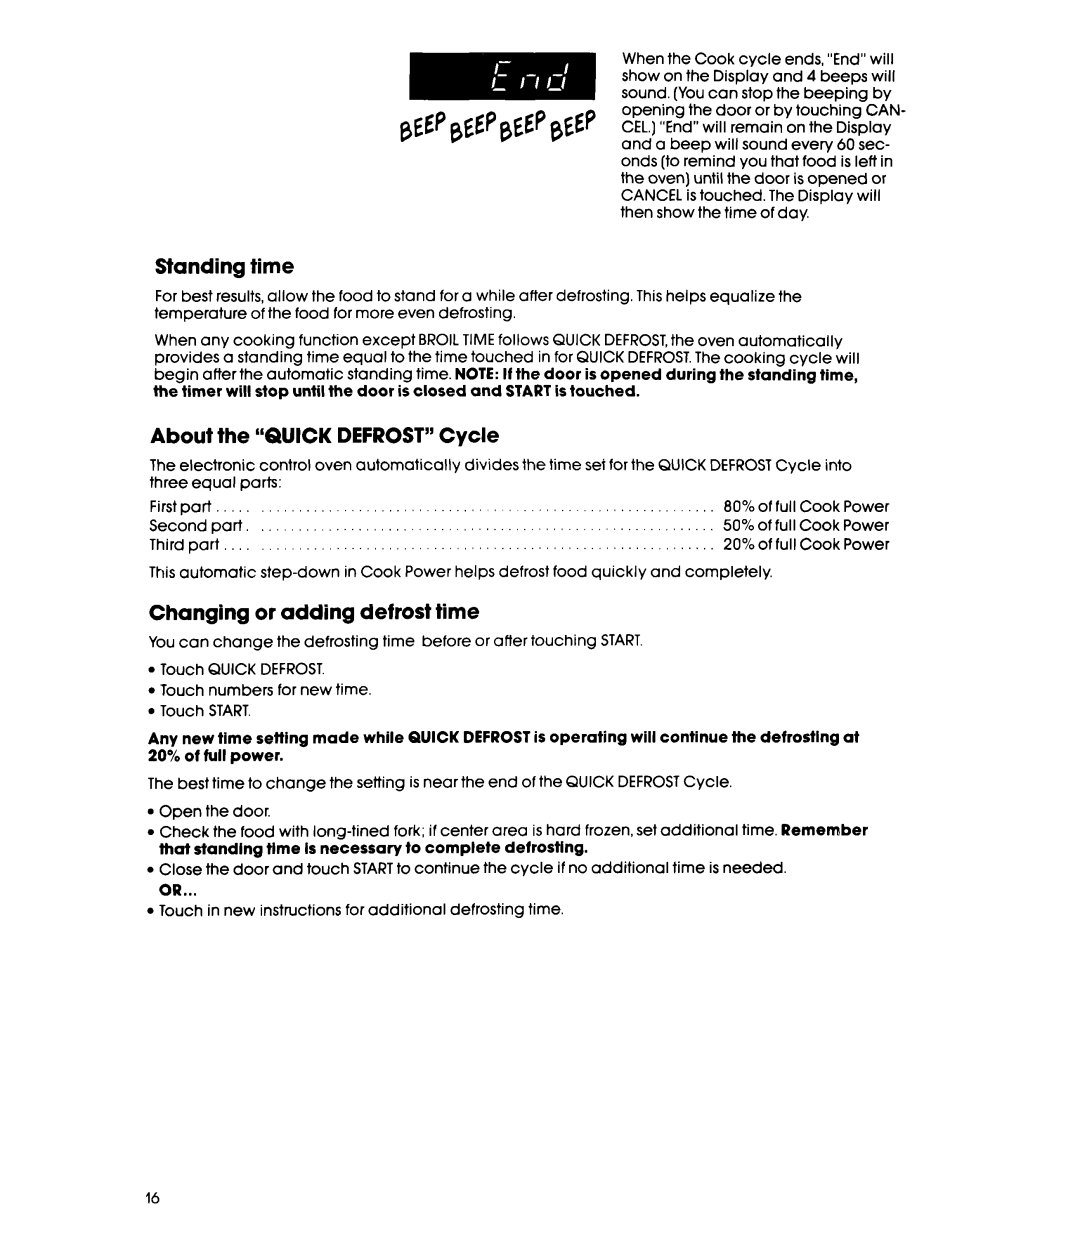 Whirlpool MC8991XT, MC8990XT manual Standing, time, About the “QUICK DEFROST” Cycle, or adding, Changing 